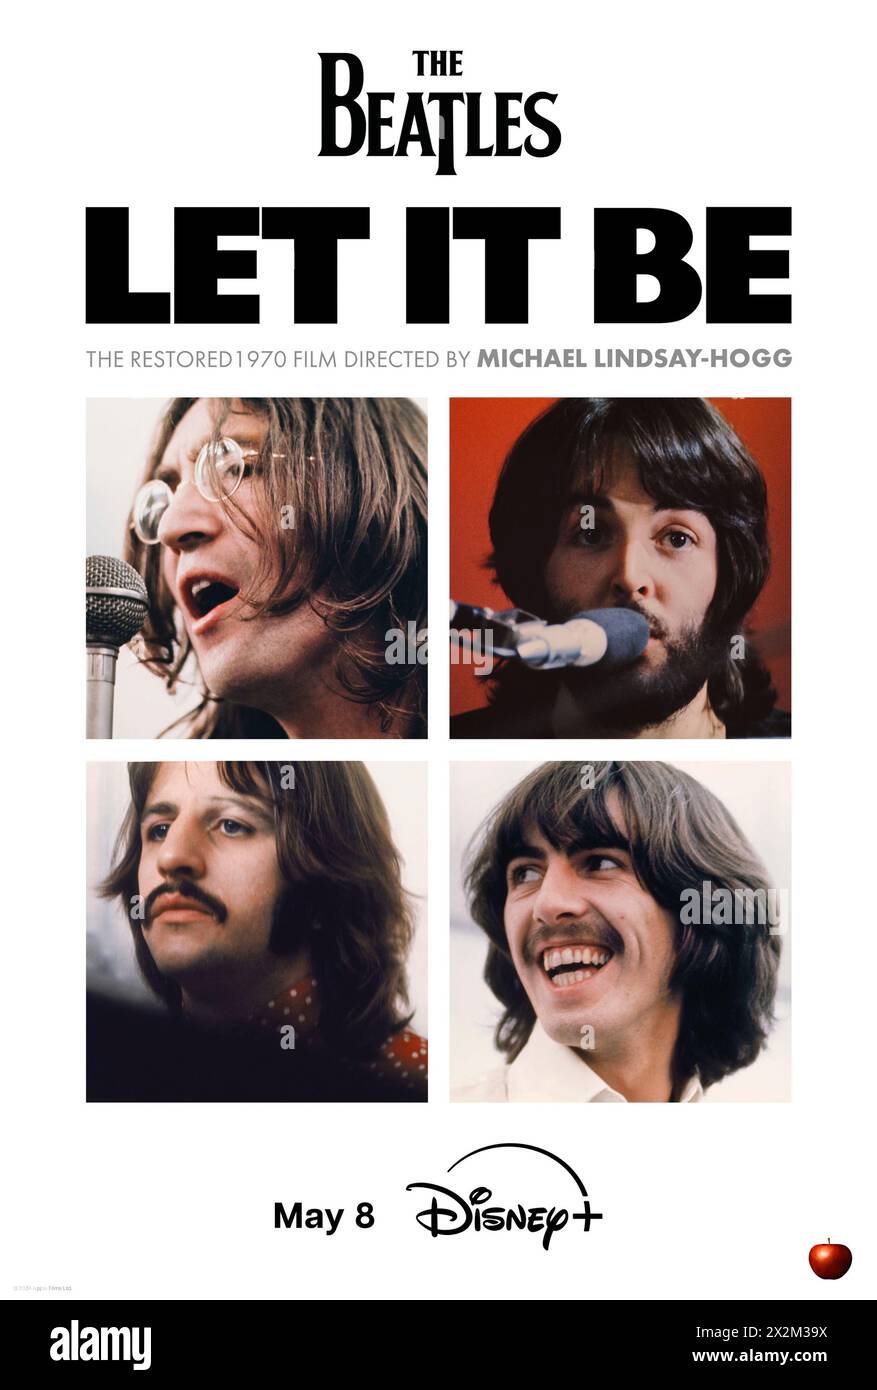 Let It Be (1970) directed by Michael Lindsay-Hogg and starring George Harrison, John Lennon, Paul McCartney and Ringo Starr. Restored and re-released documentary about The Beatles' attempt to recapture their old group spirit by making a back to basics album, which instead drove them further apart. US one sheet poster.***EDITORIAL USE ONLY*** Credit: BFA / Disney+ Stock Photo